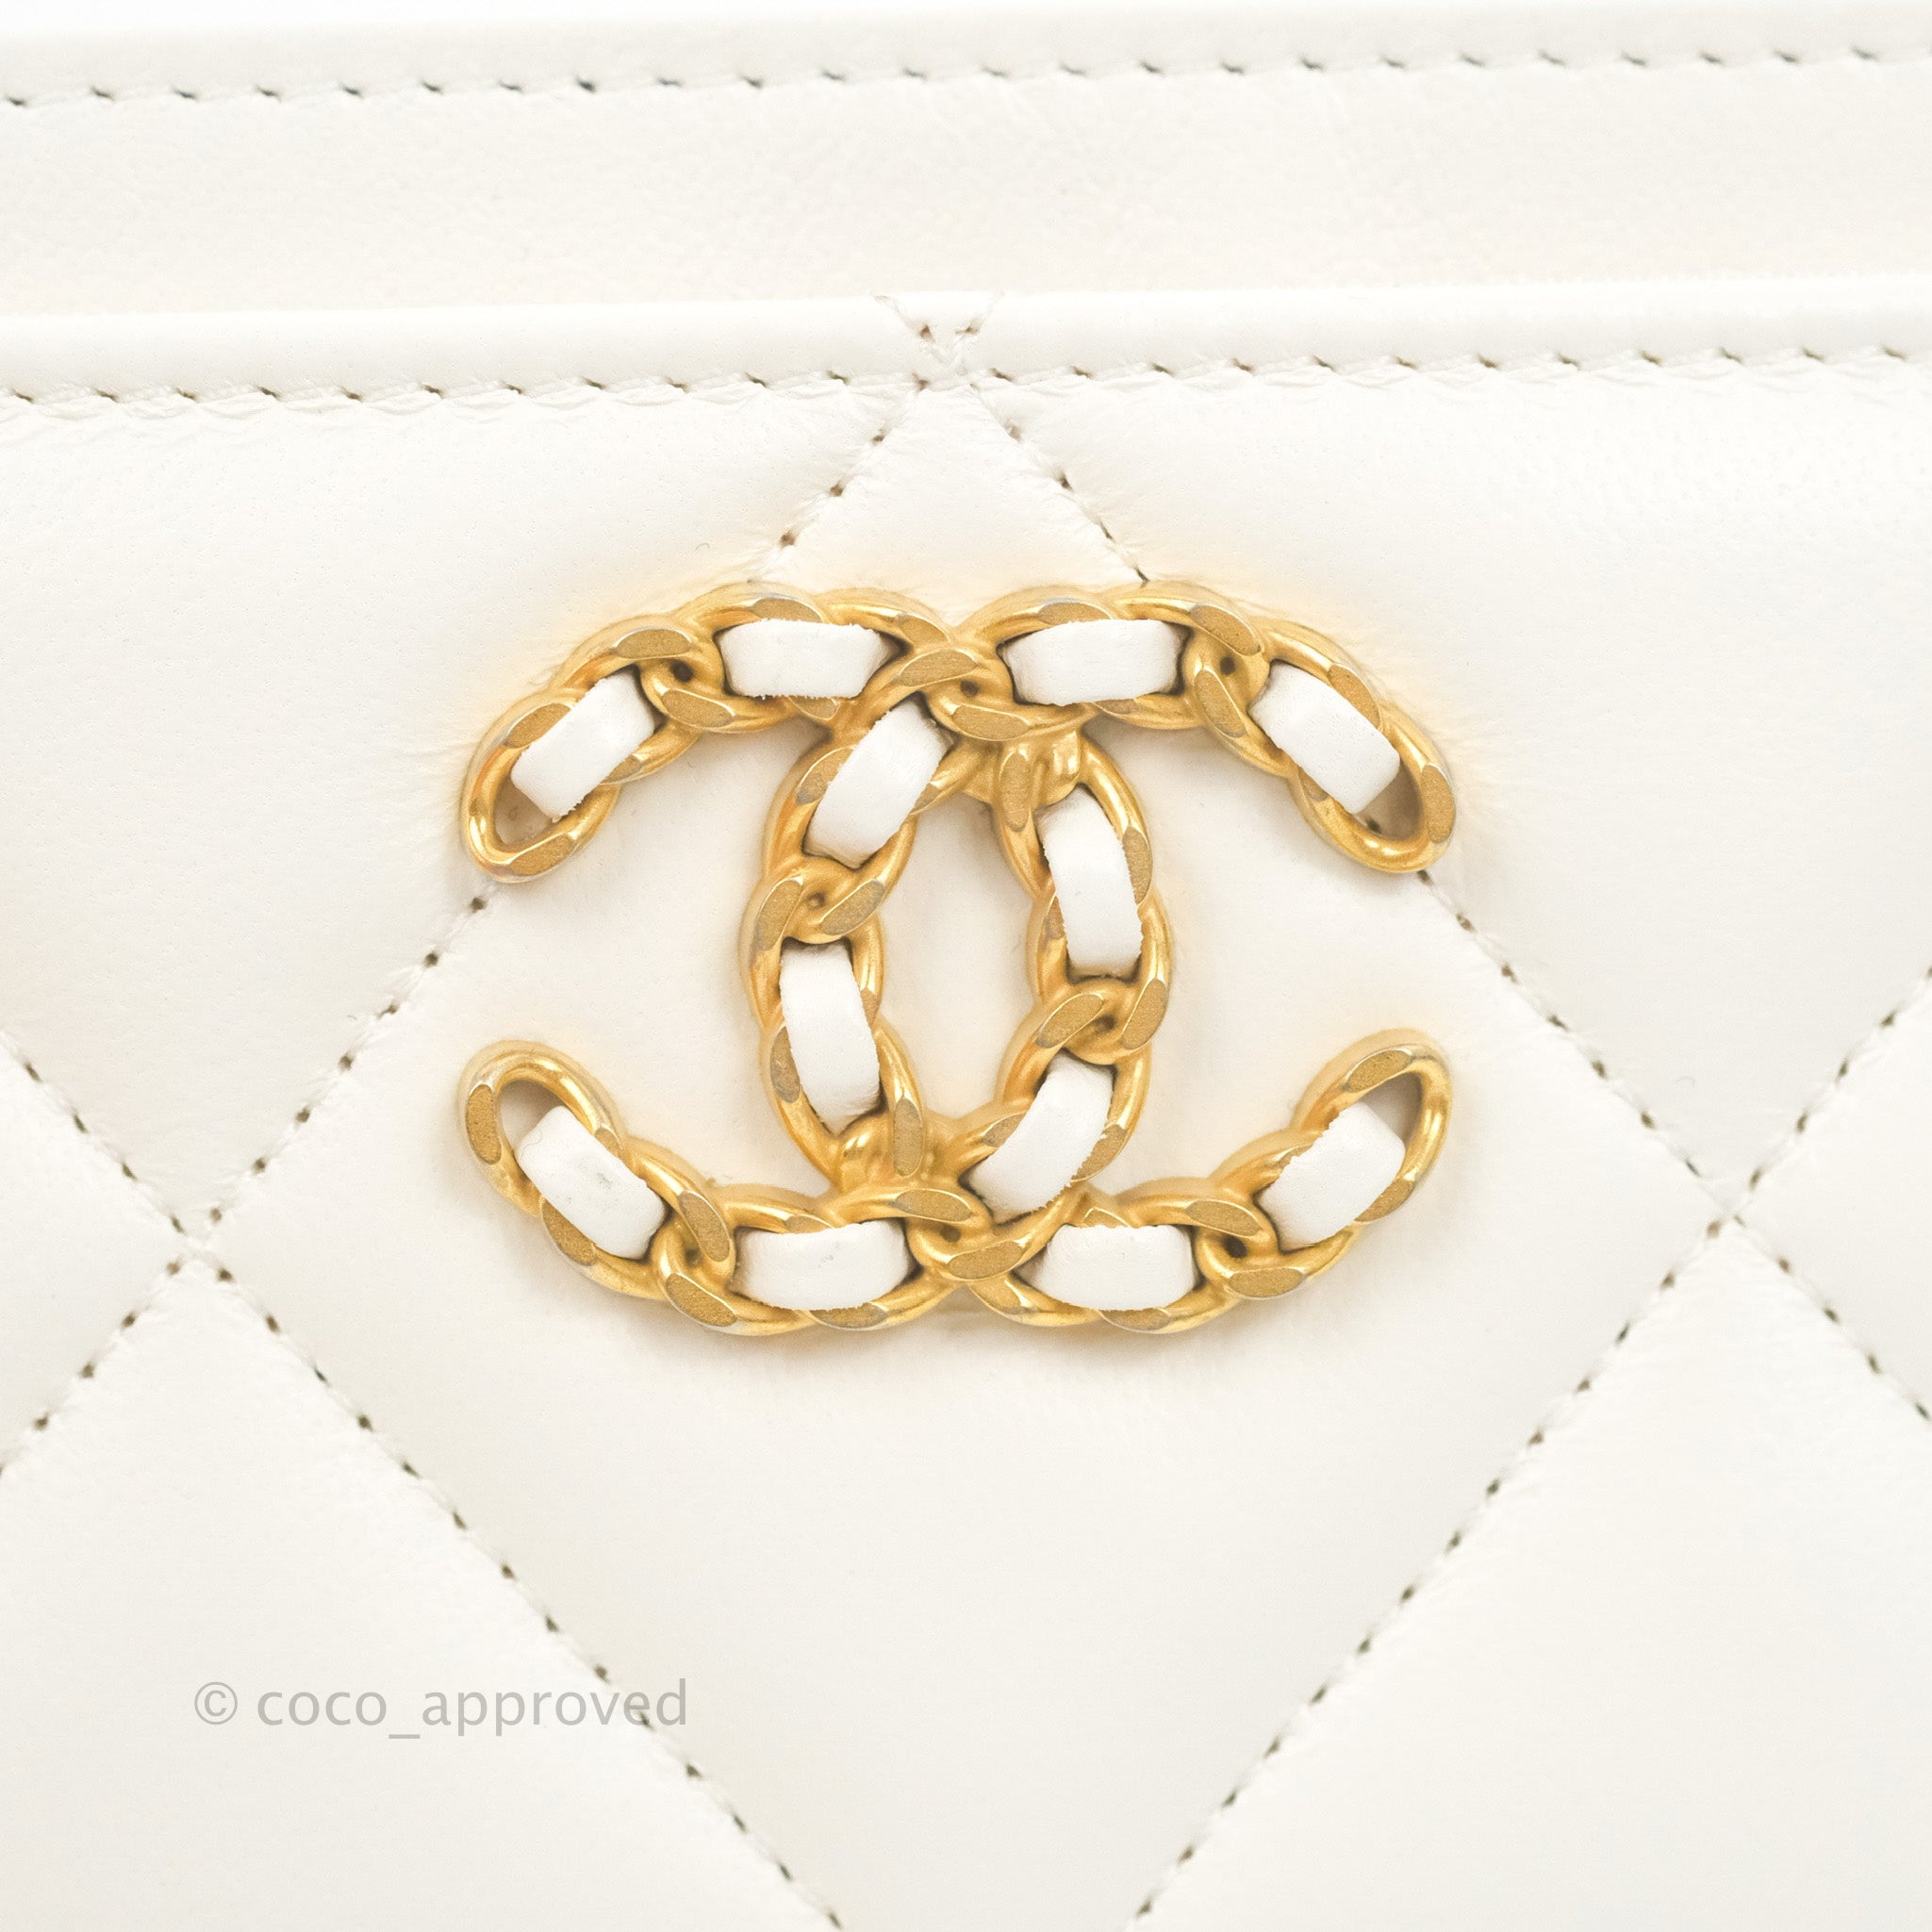 chanel stickers logo decal